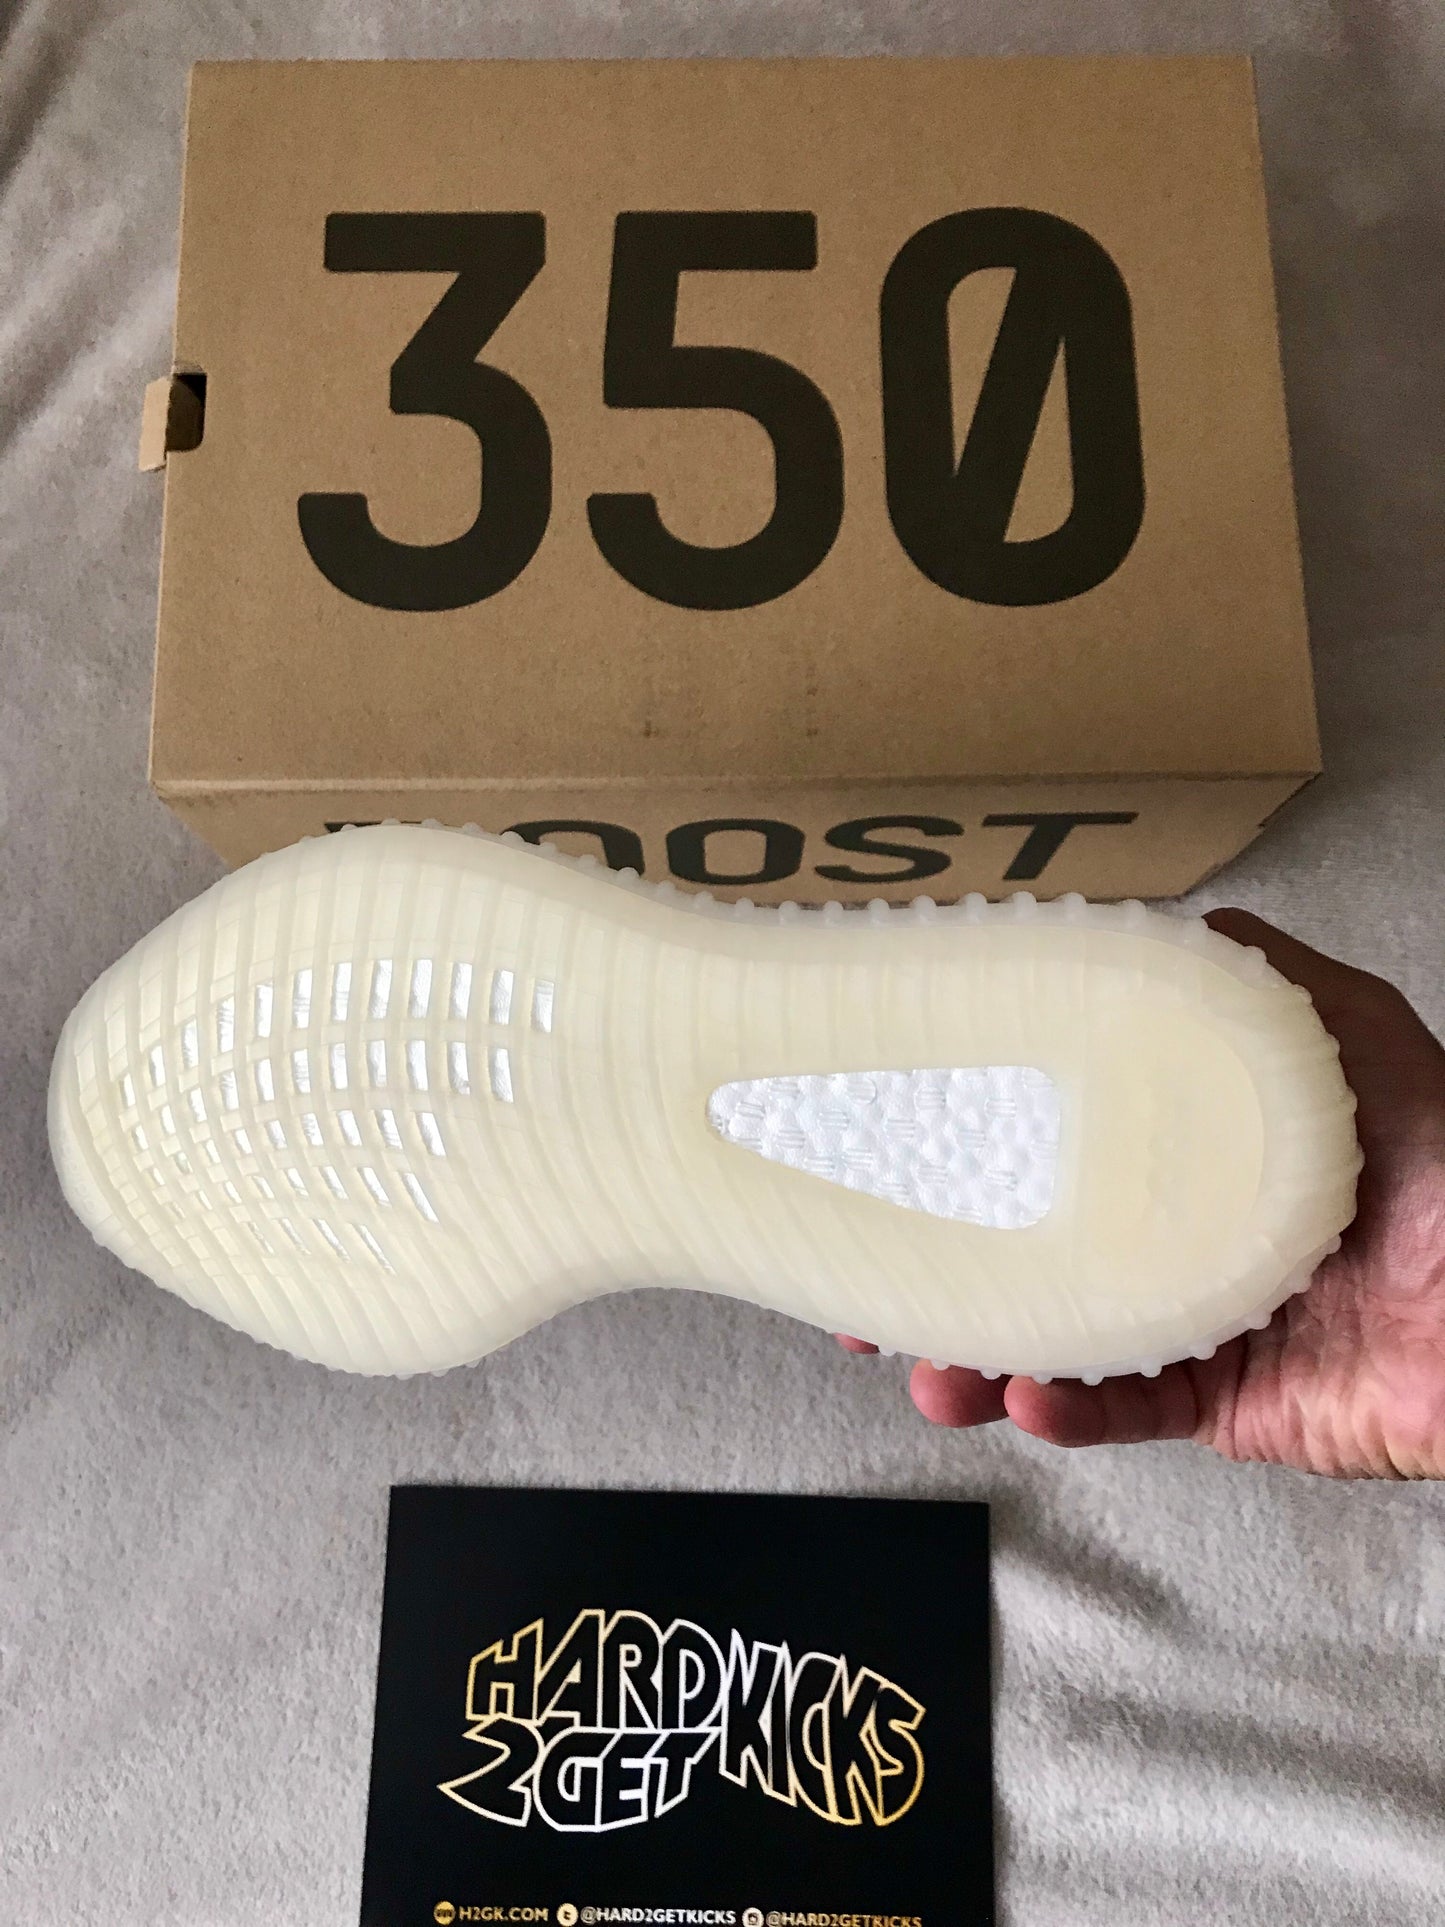 Yeezy Boost 350 V2 - Cloud (non-reflective)